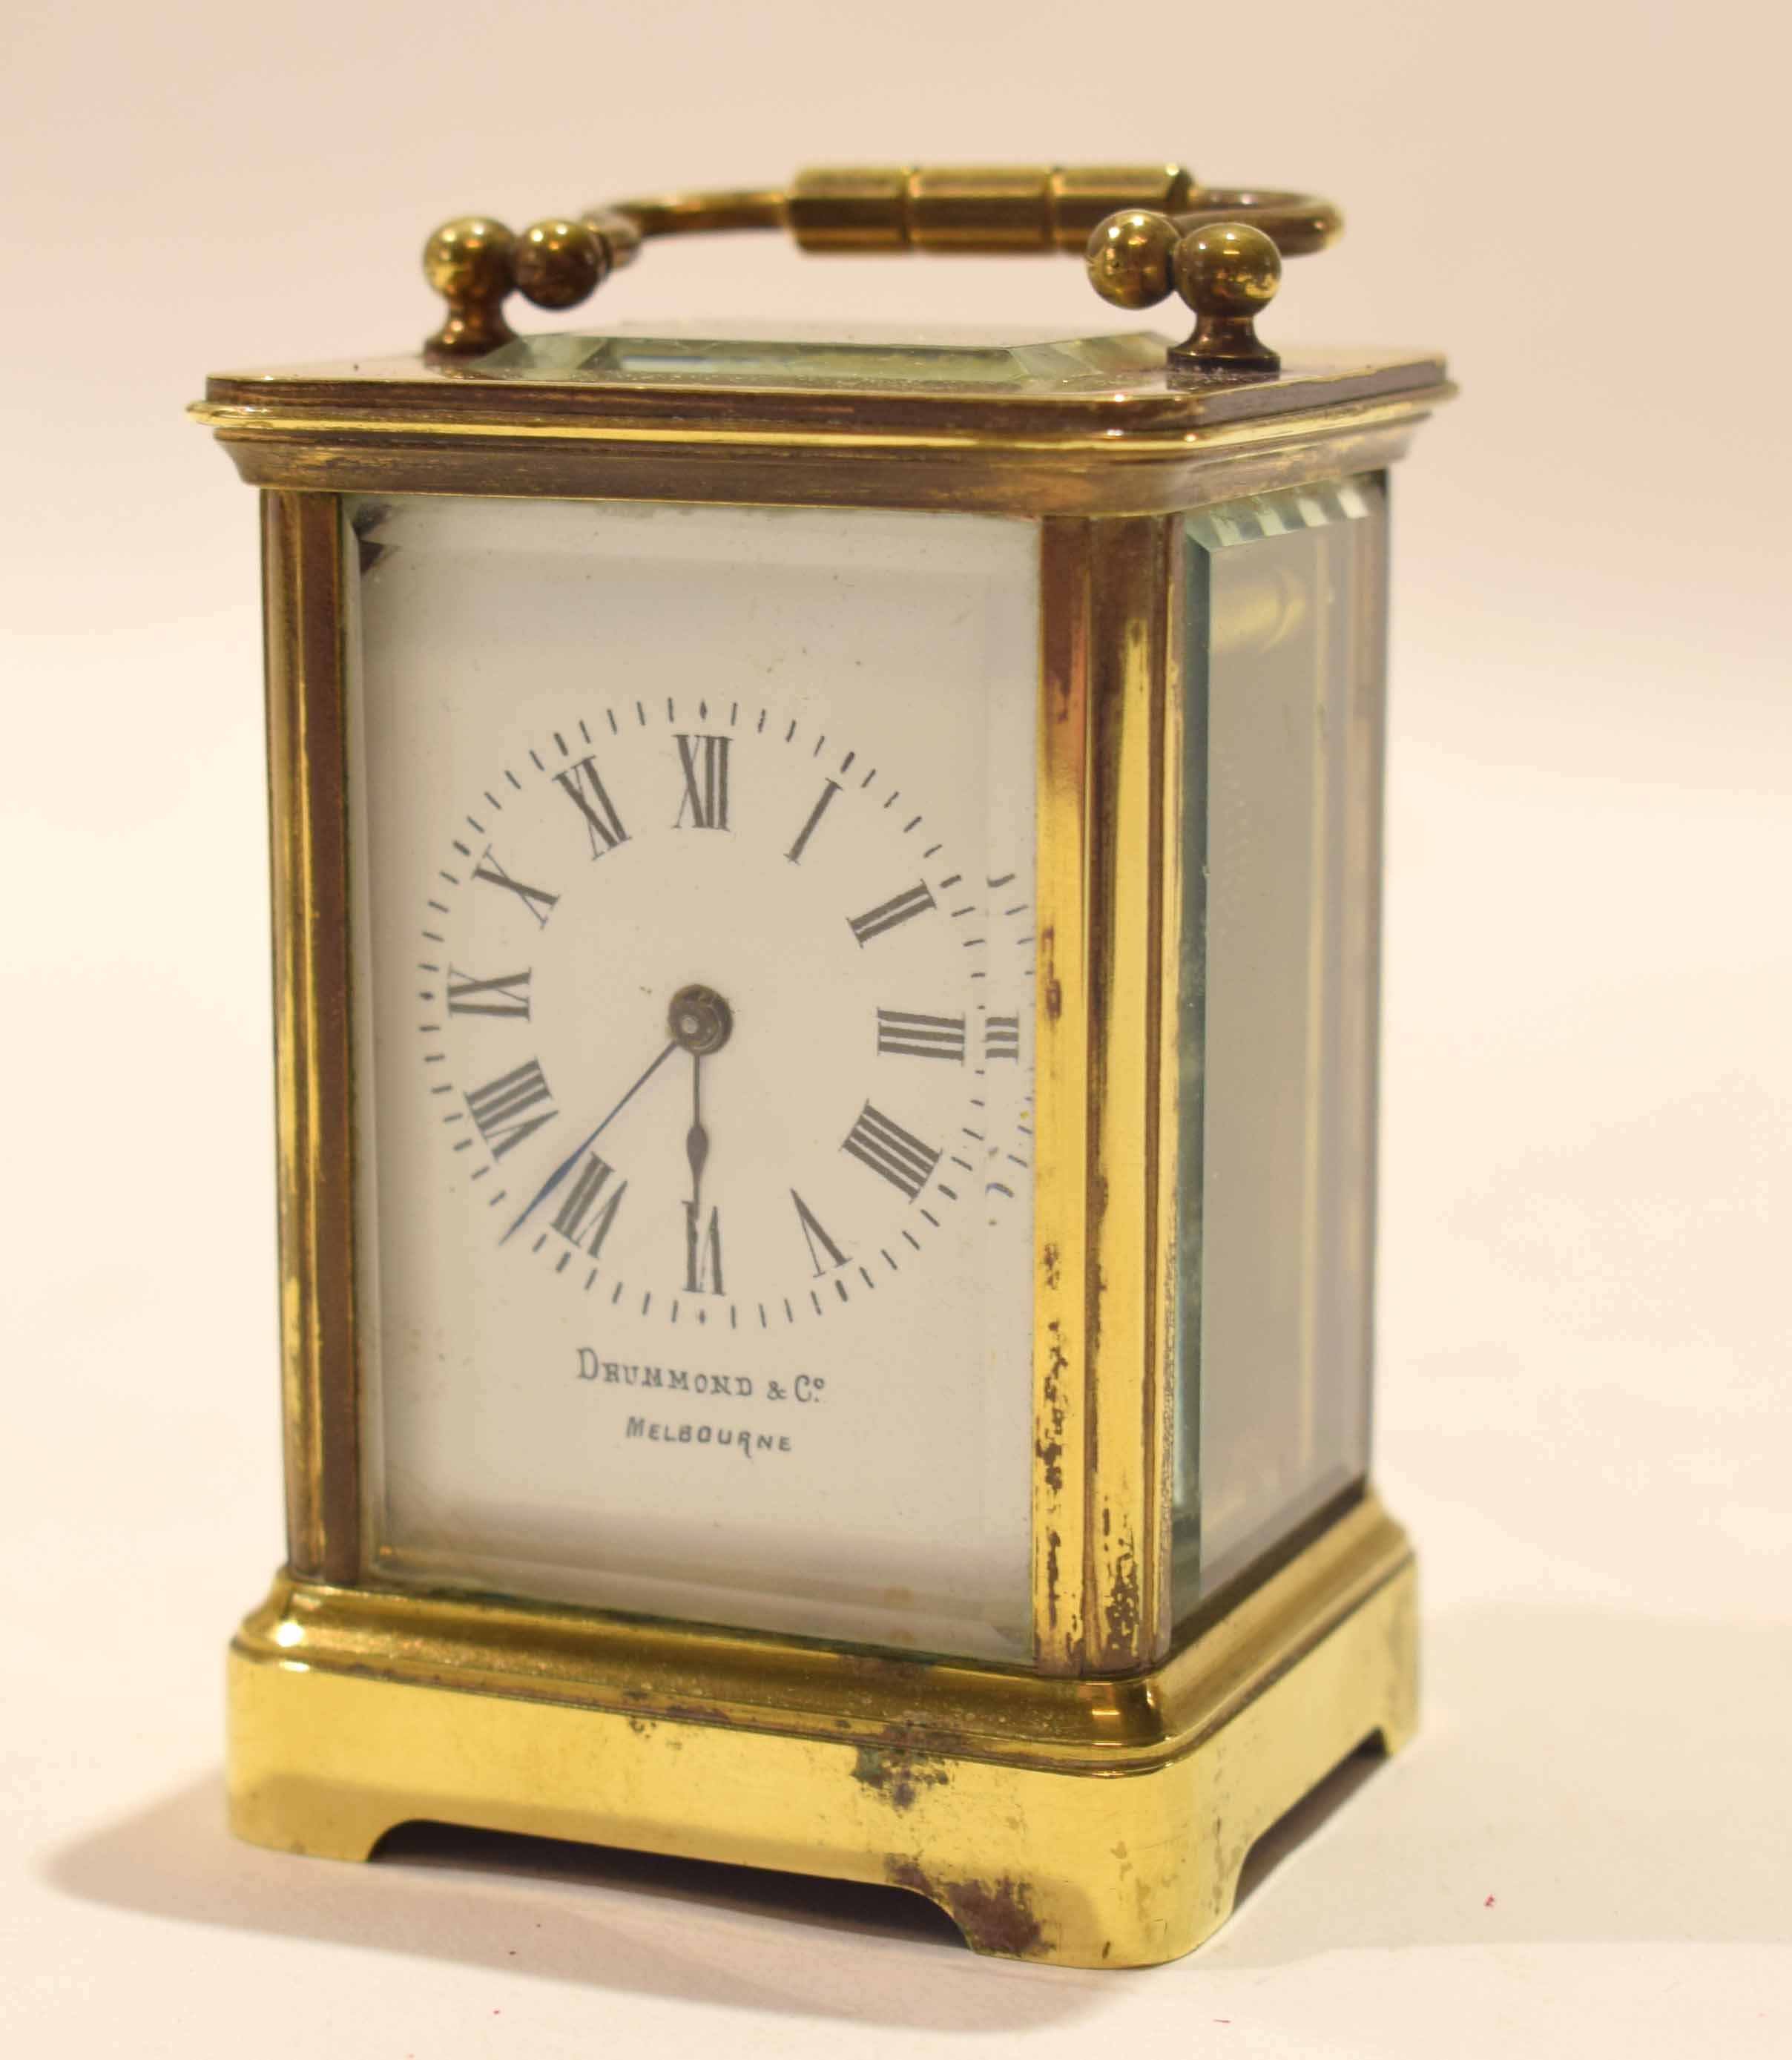 Miniature brass carriage clock, retailer's name Drummond & Co of ...